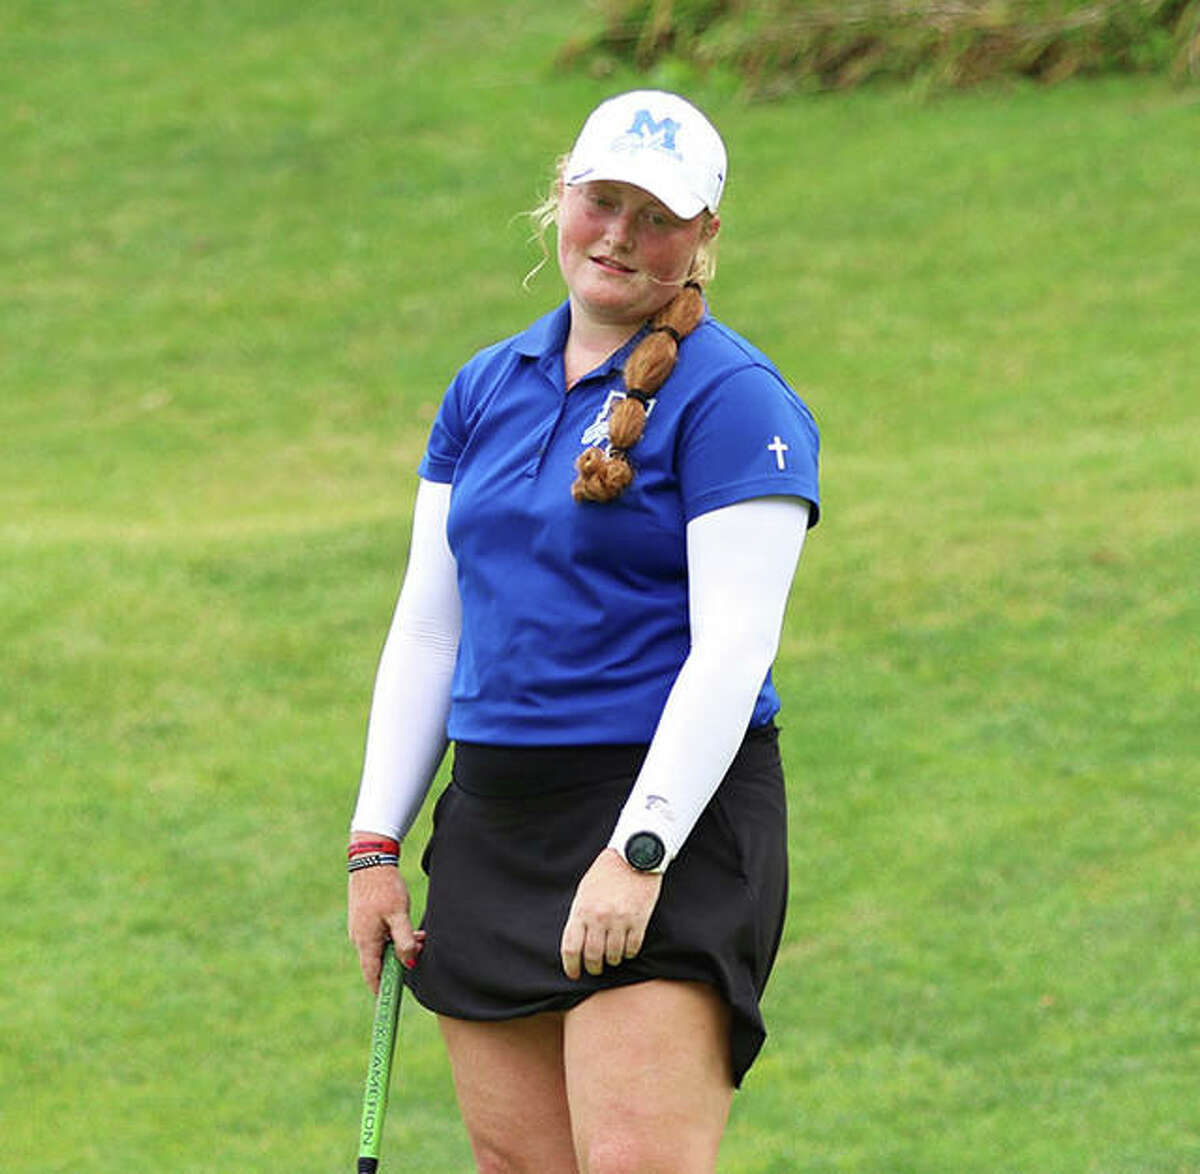 Marquette’s Gracie Piar reacts as her birdie putt an inch or two short of the cup on hole No. 12 at the Blast Off Tourney on Saturday at Olin. Piar made five birdie putts and two more for eagle while shooting a 6-under par 66 to win the tourney by four shots.